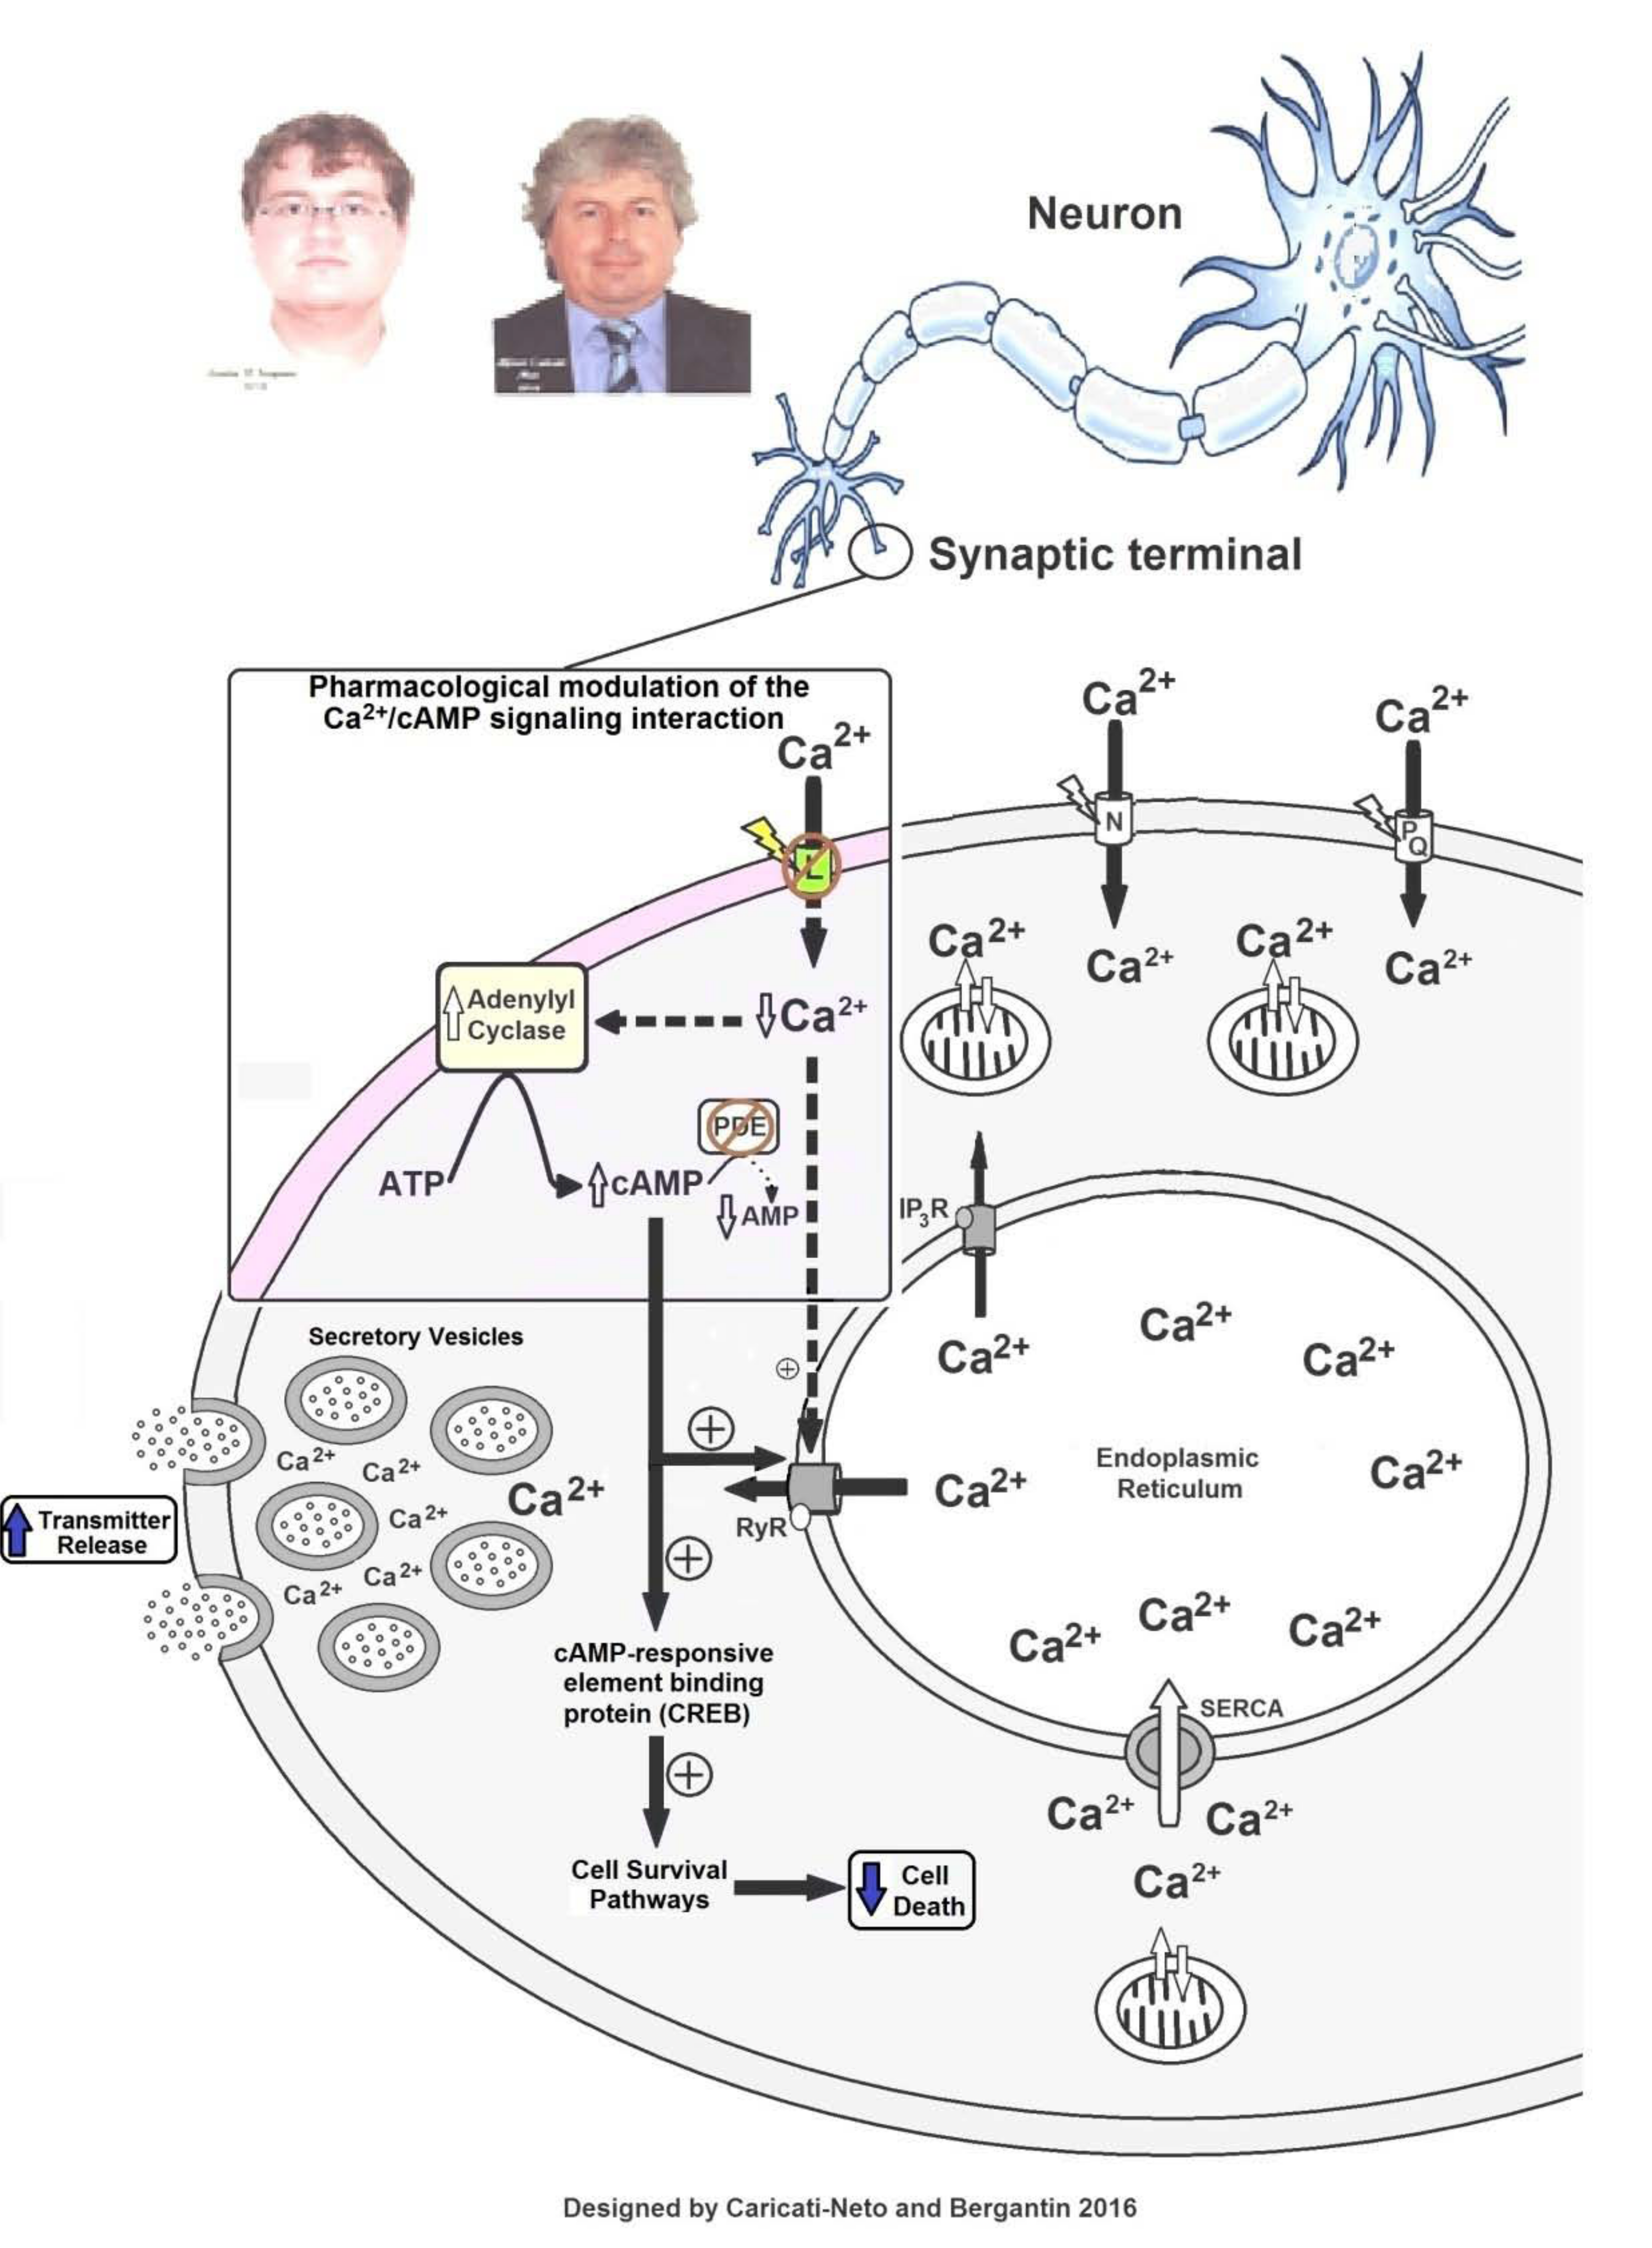 Figure 2 Increase of neurotransmitter release and attenuation of neuronal death (neuroprotection) produced by pharmacological modulation of the Ca2+/cAMP signaling interaction by combined use of L-type Ca2+ channel blockers (CCBs) and cAMP-enhancer drugs.